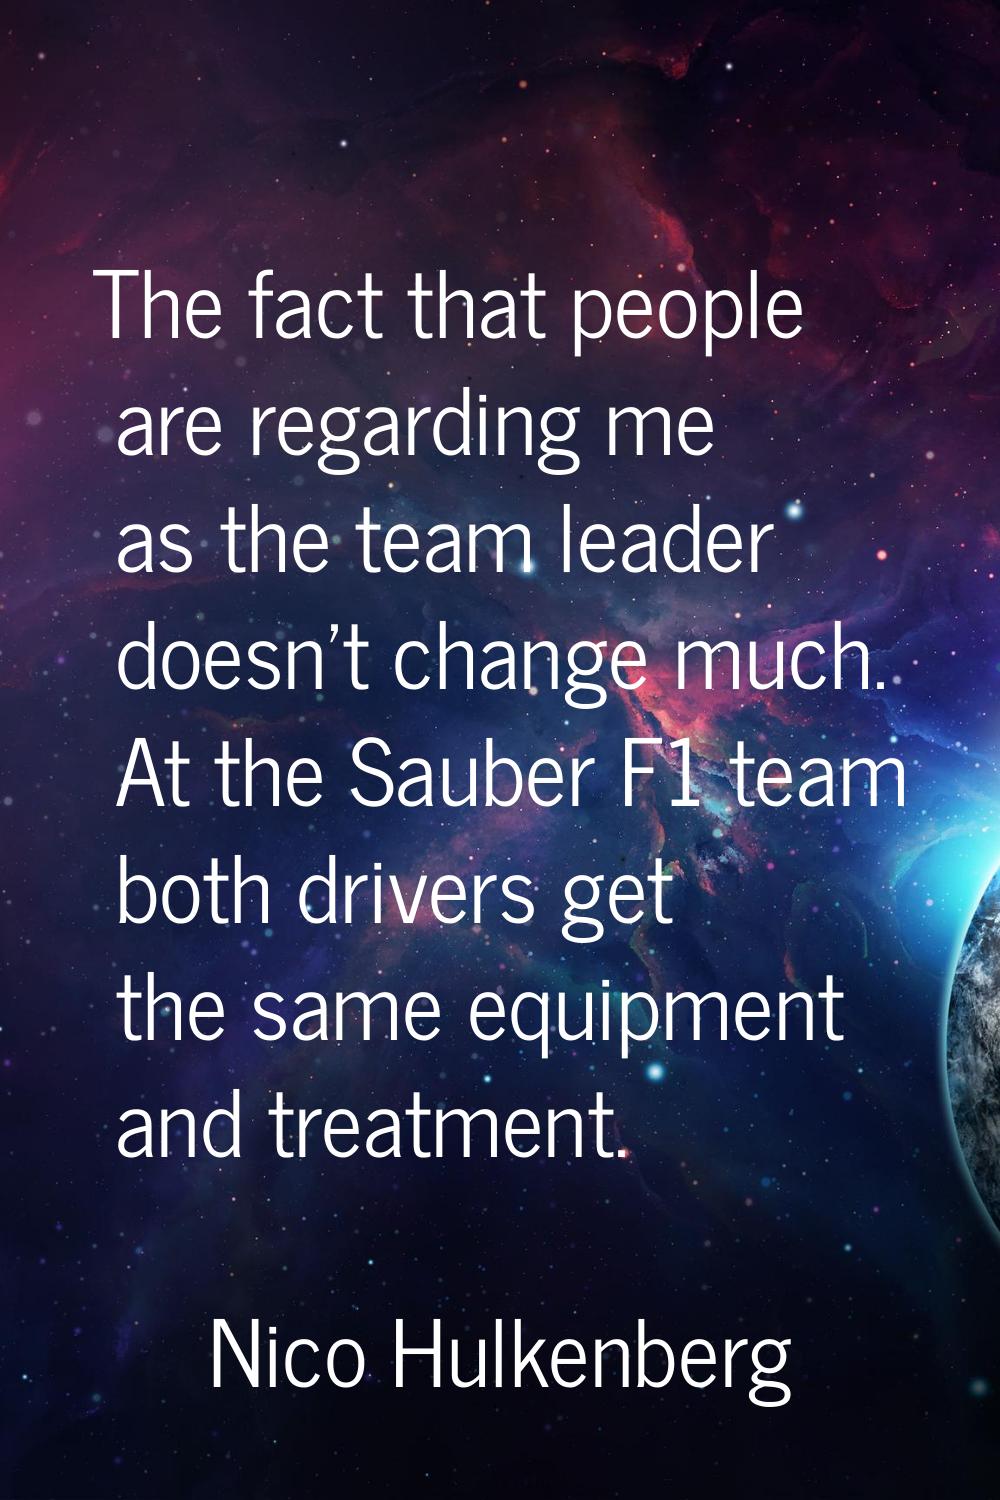 The fact that people are regarding me as the team leader doesn't change much. At the Sauber F1 team